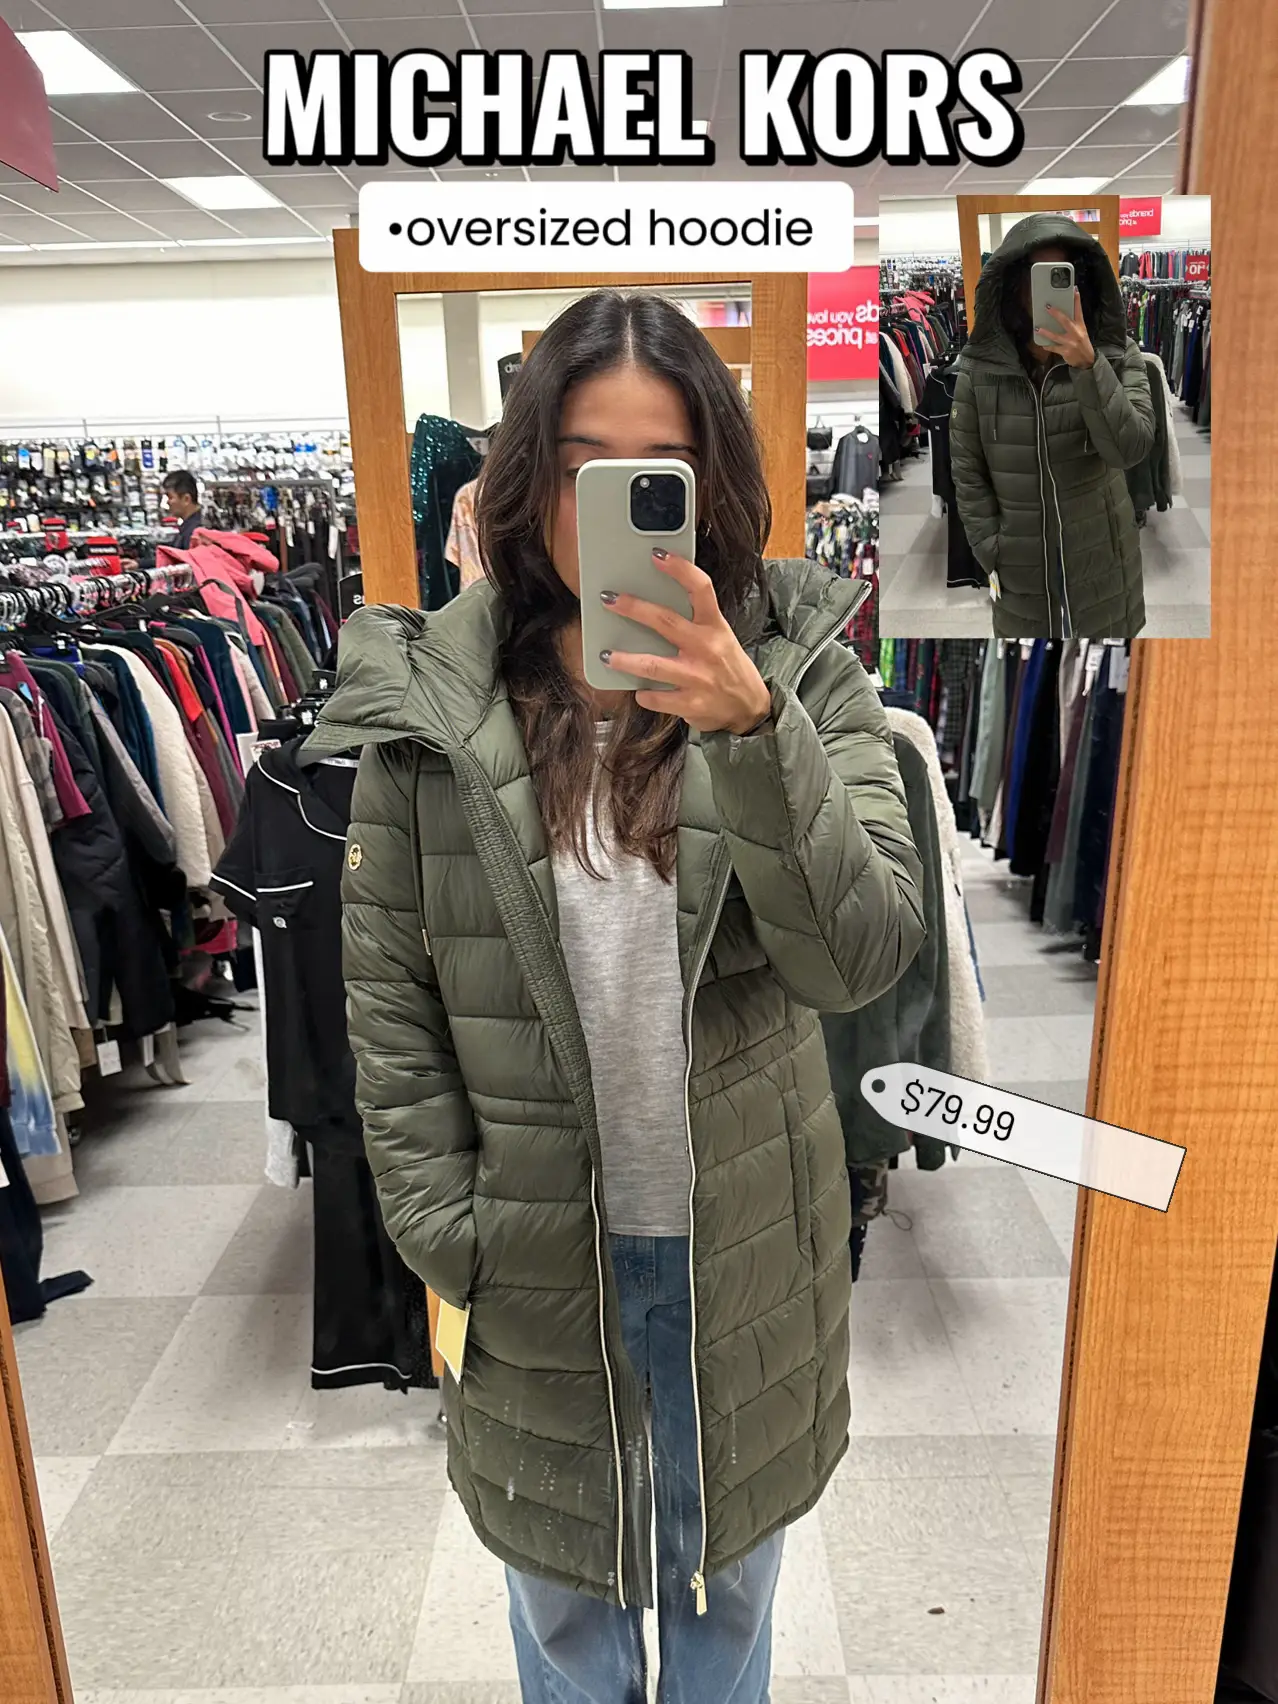  A woman in a green Michael Kors hoodie is taking a selfie in a store.